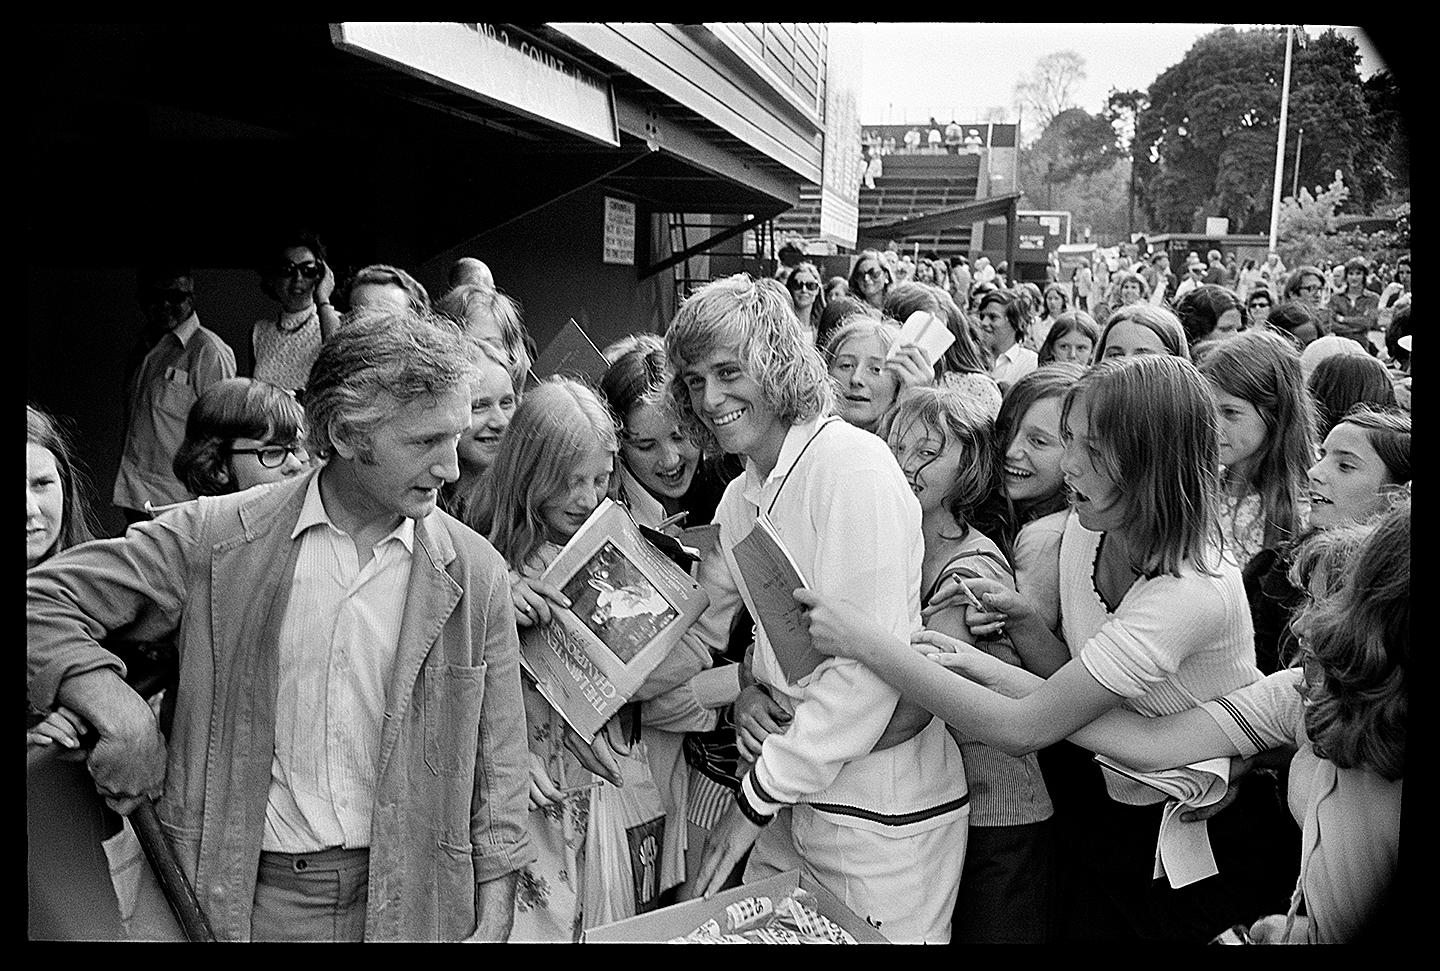 ‘The Rockstar Of Tennis’ 

by Arthur Steel

Paper size: 20 x 13 inches / 51 x 33 cm

Framing options available.

Björn Borg, the first ‘rock star’ of professional tennis surrounded by doting fans at the Wimbledon Tennis Championships.

Note: Image